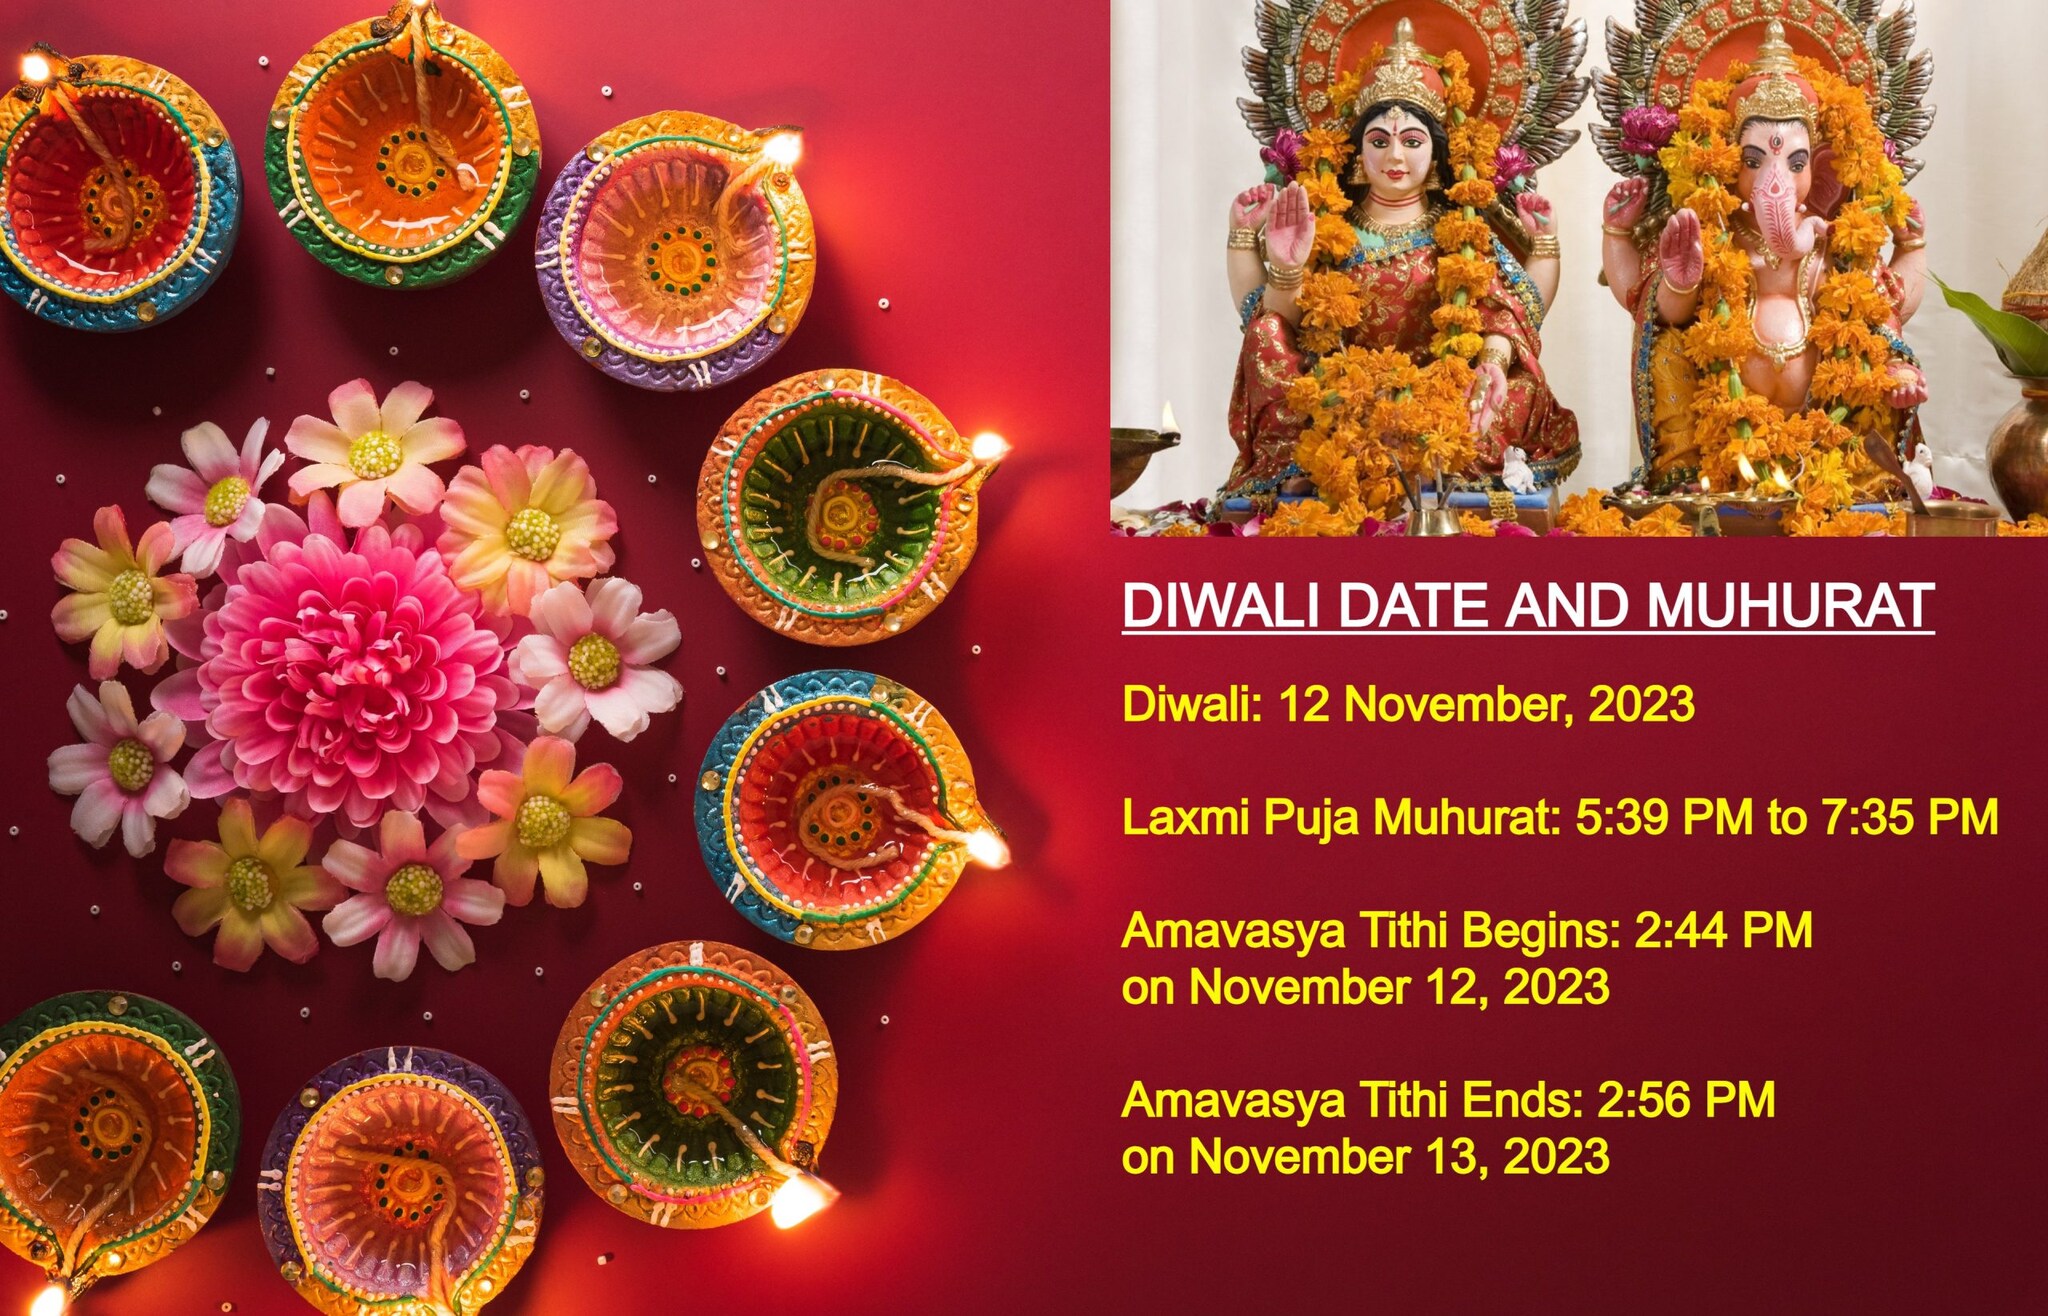 Tamil Deepavali 2023 Date and Shubh Muhurat: Know Puja Vidhi, Significance,  and Celebrations of Diwali Festival